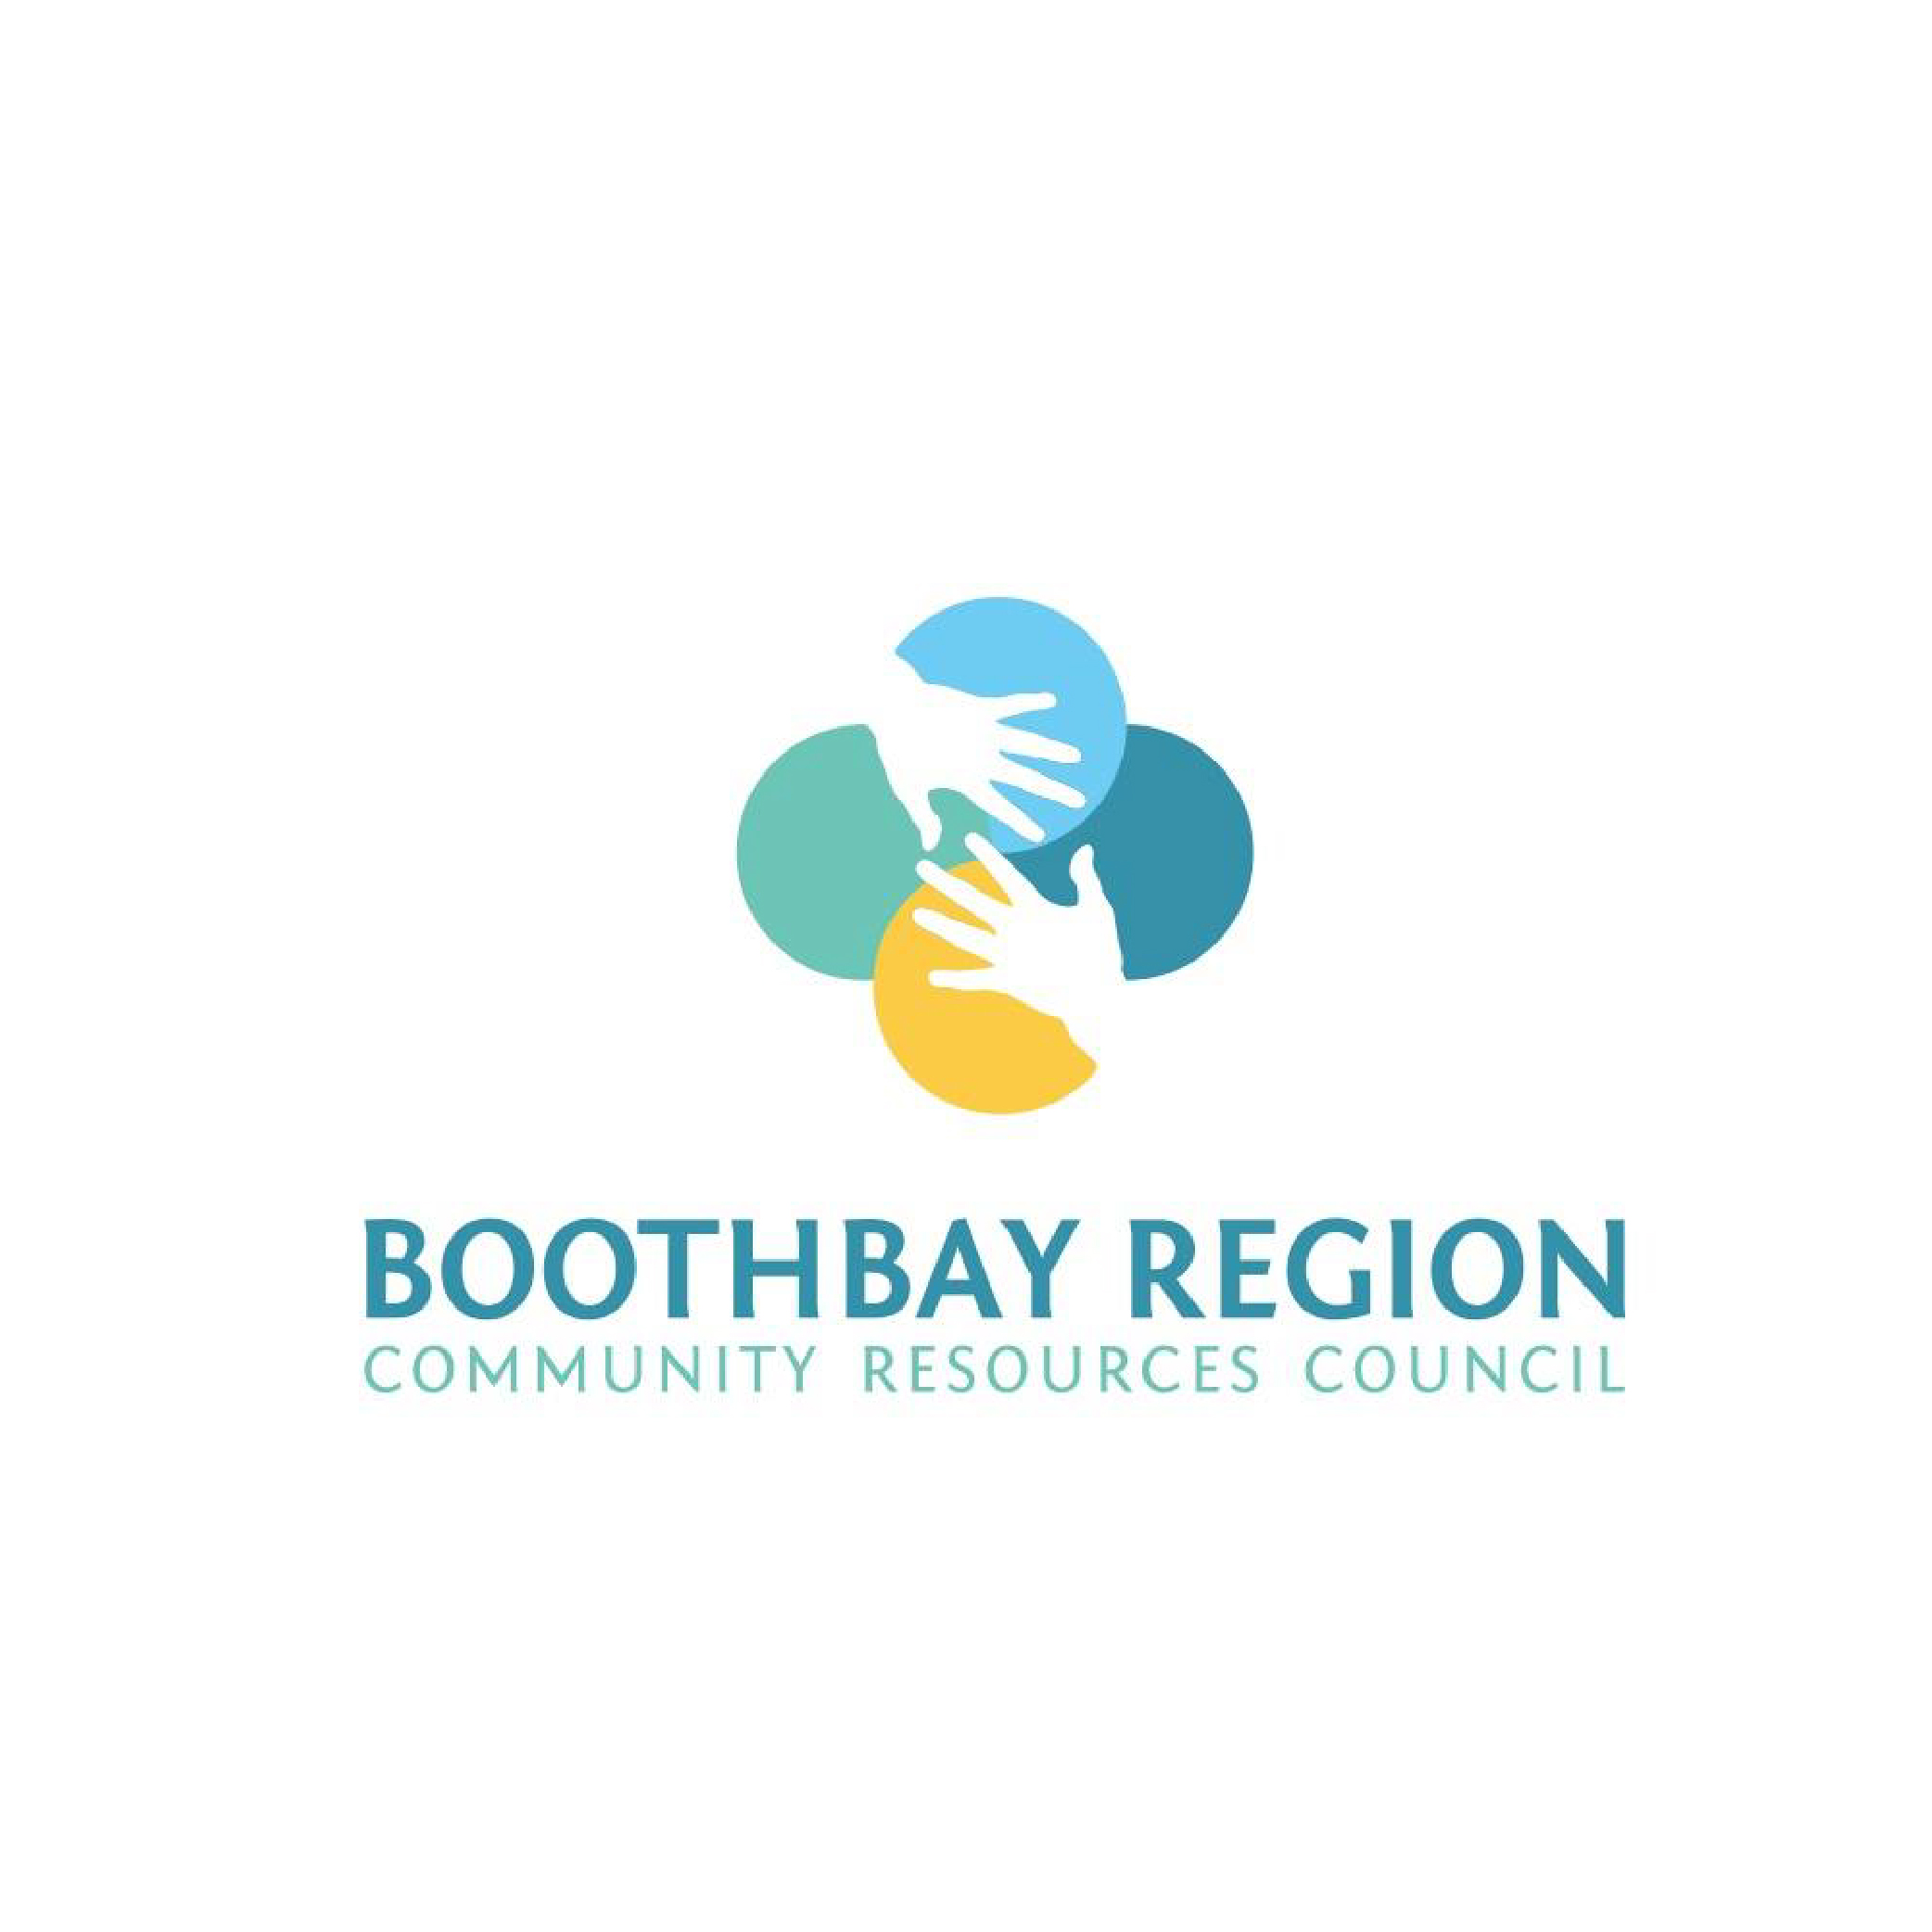 Boothbay Region Community Resources Council logo